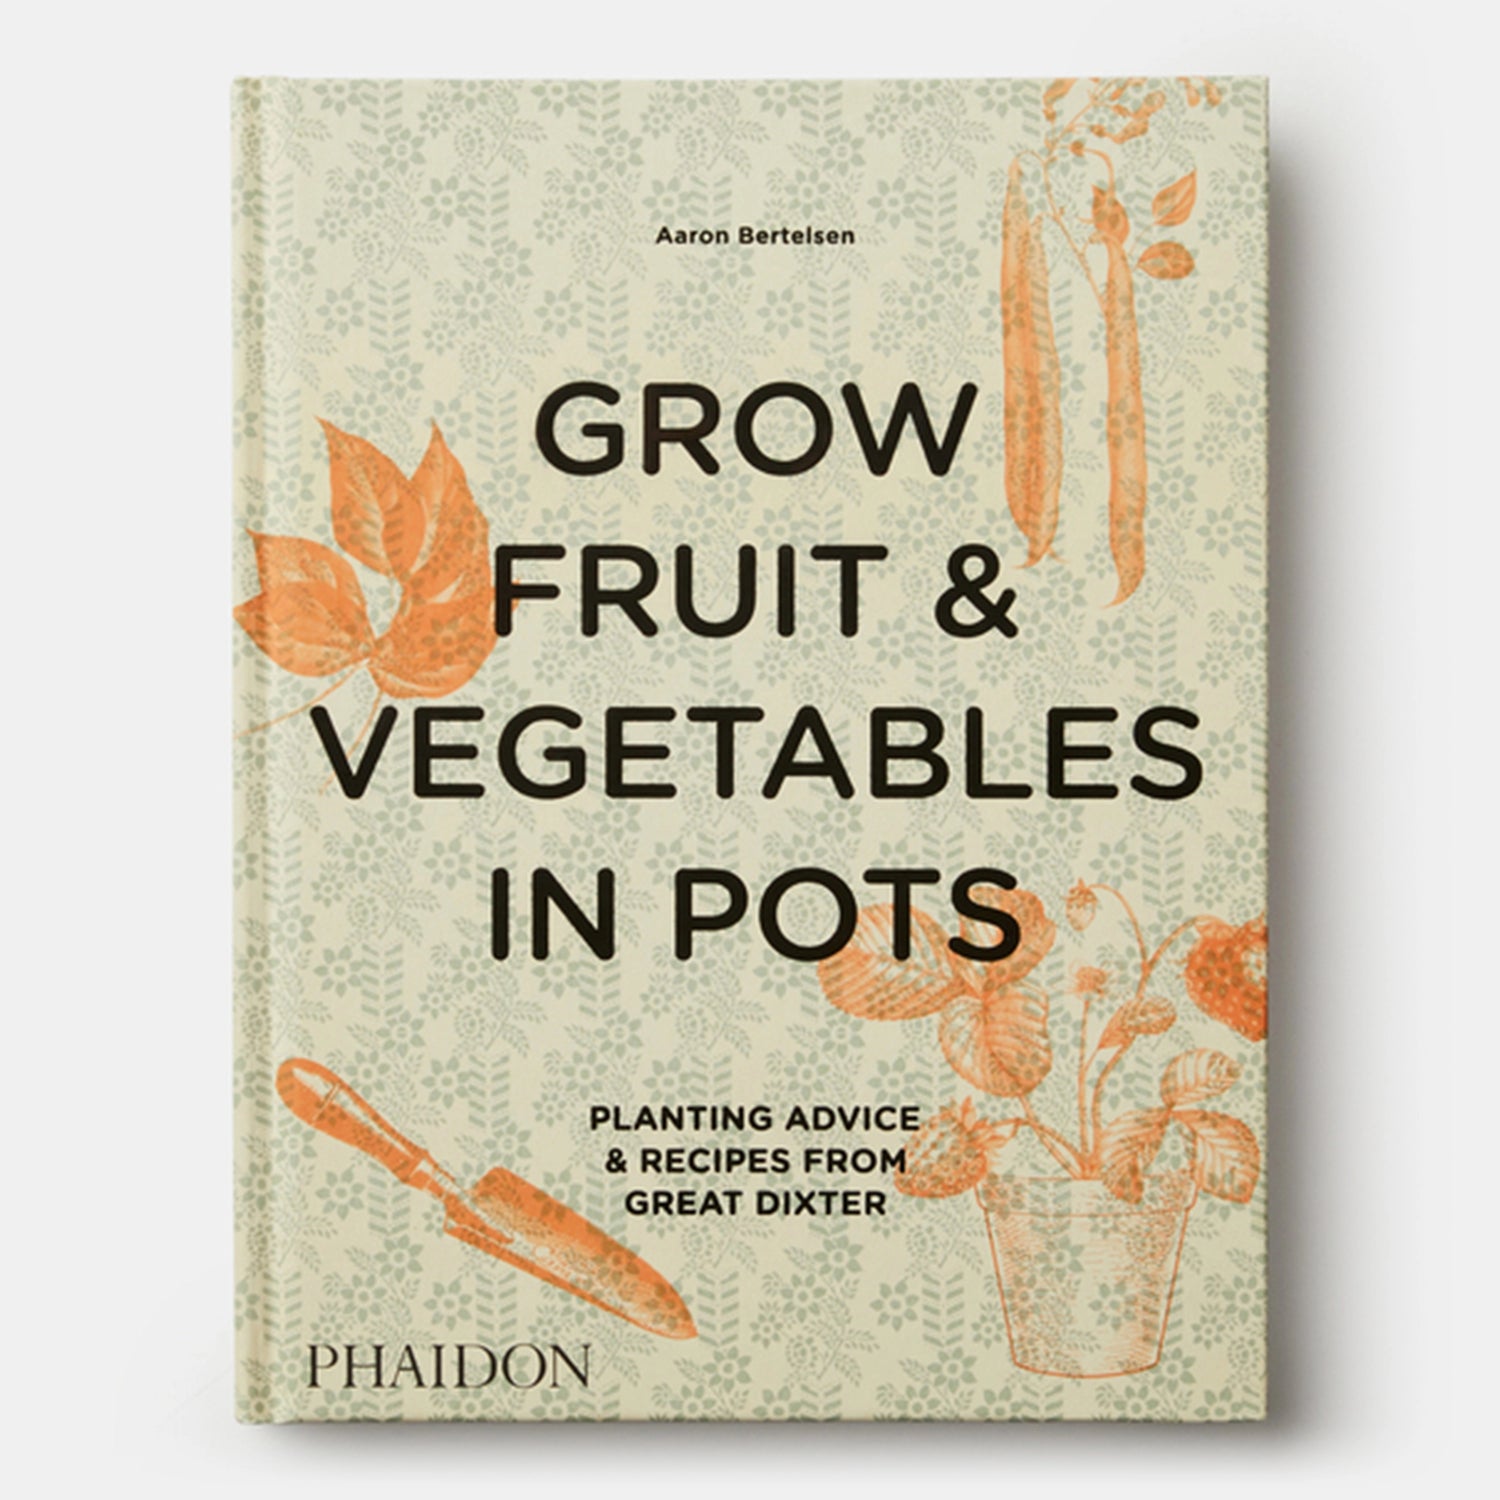  Phaidon Grow Fruit & Vegetables in Pots 9780714878614 The Green Thumb Club